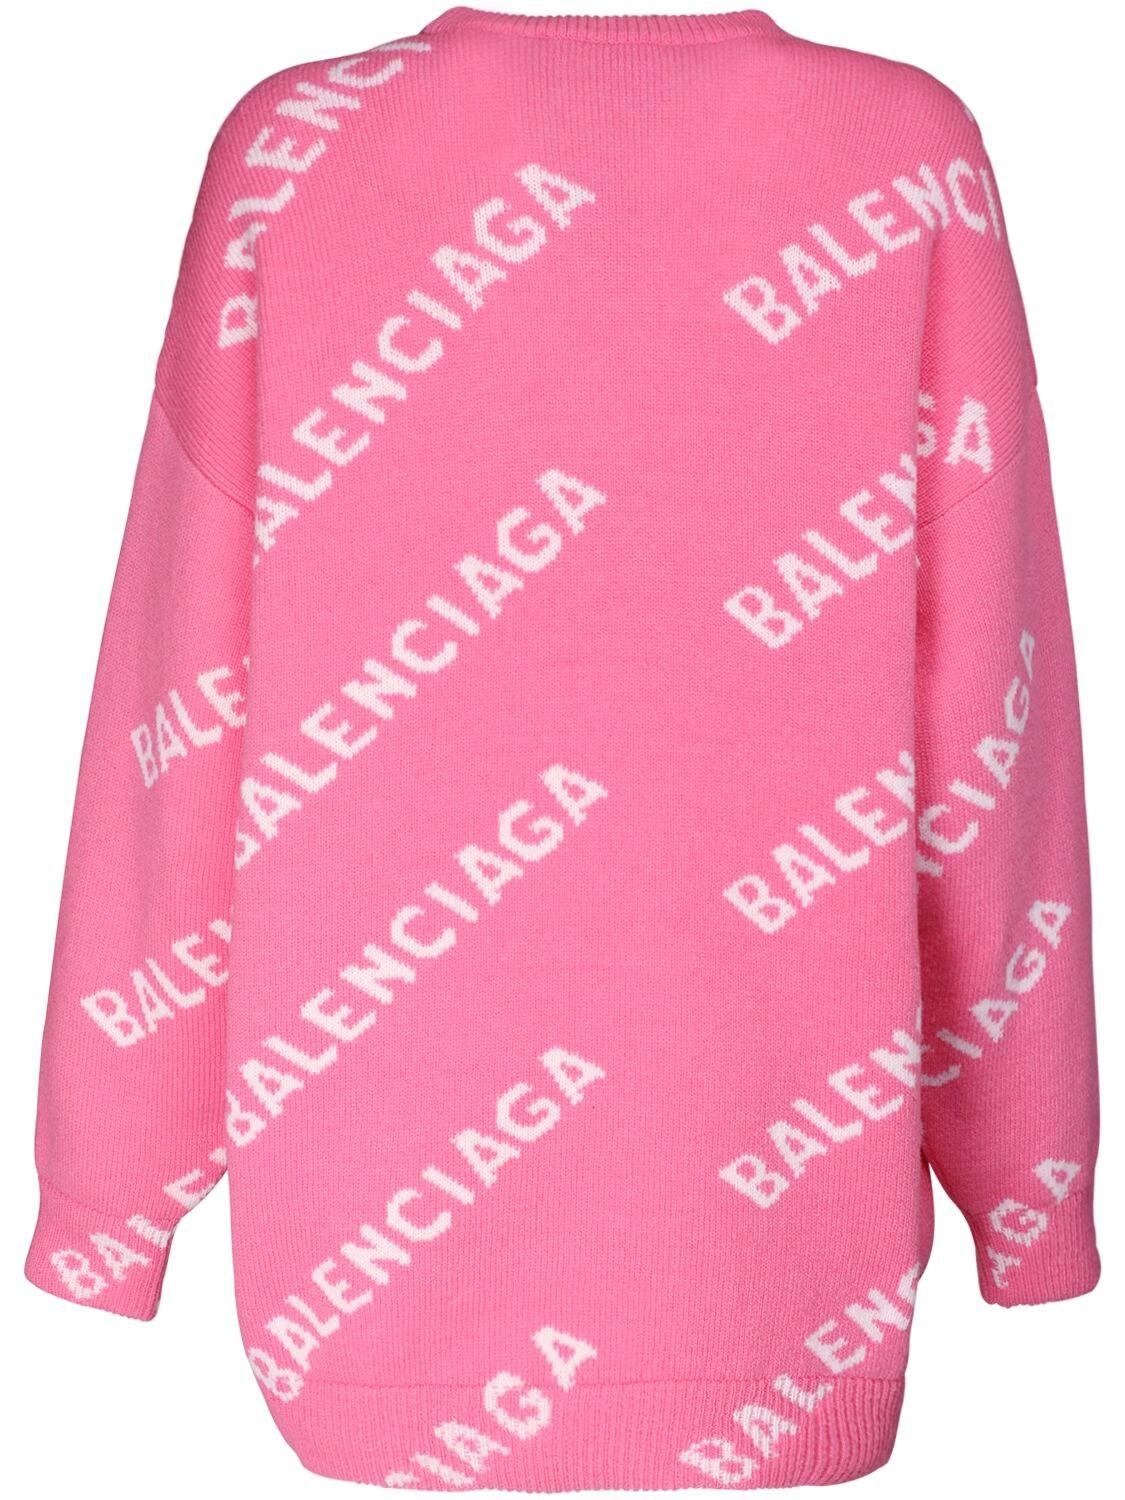 Balenciaga Over Allover Logo Knit Wool Cardigan in Pink/White (Pink